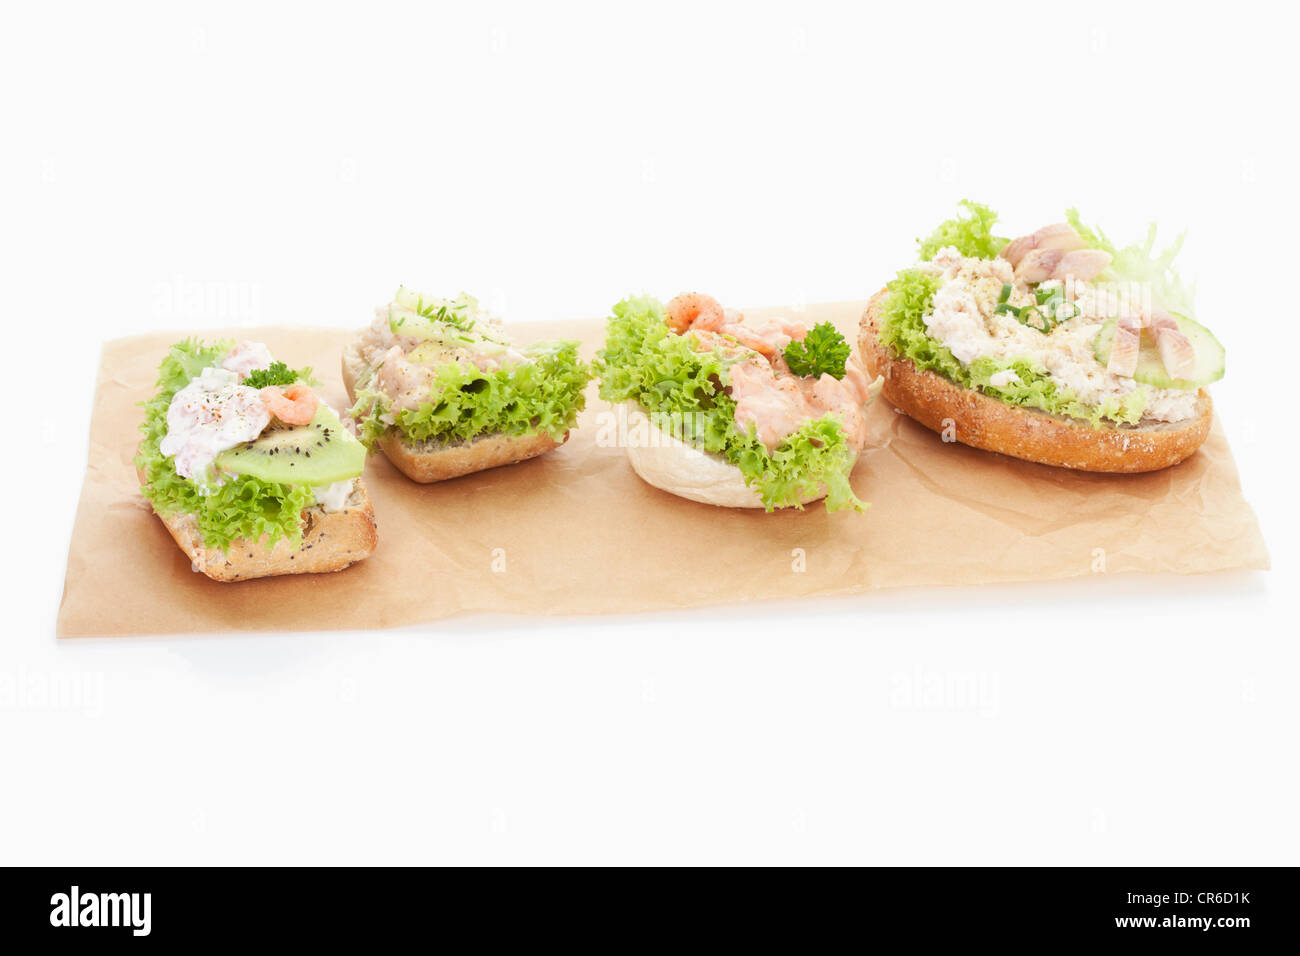 Shrimp and trout fillet tartar sandwiches on paper Stock Photo